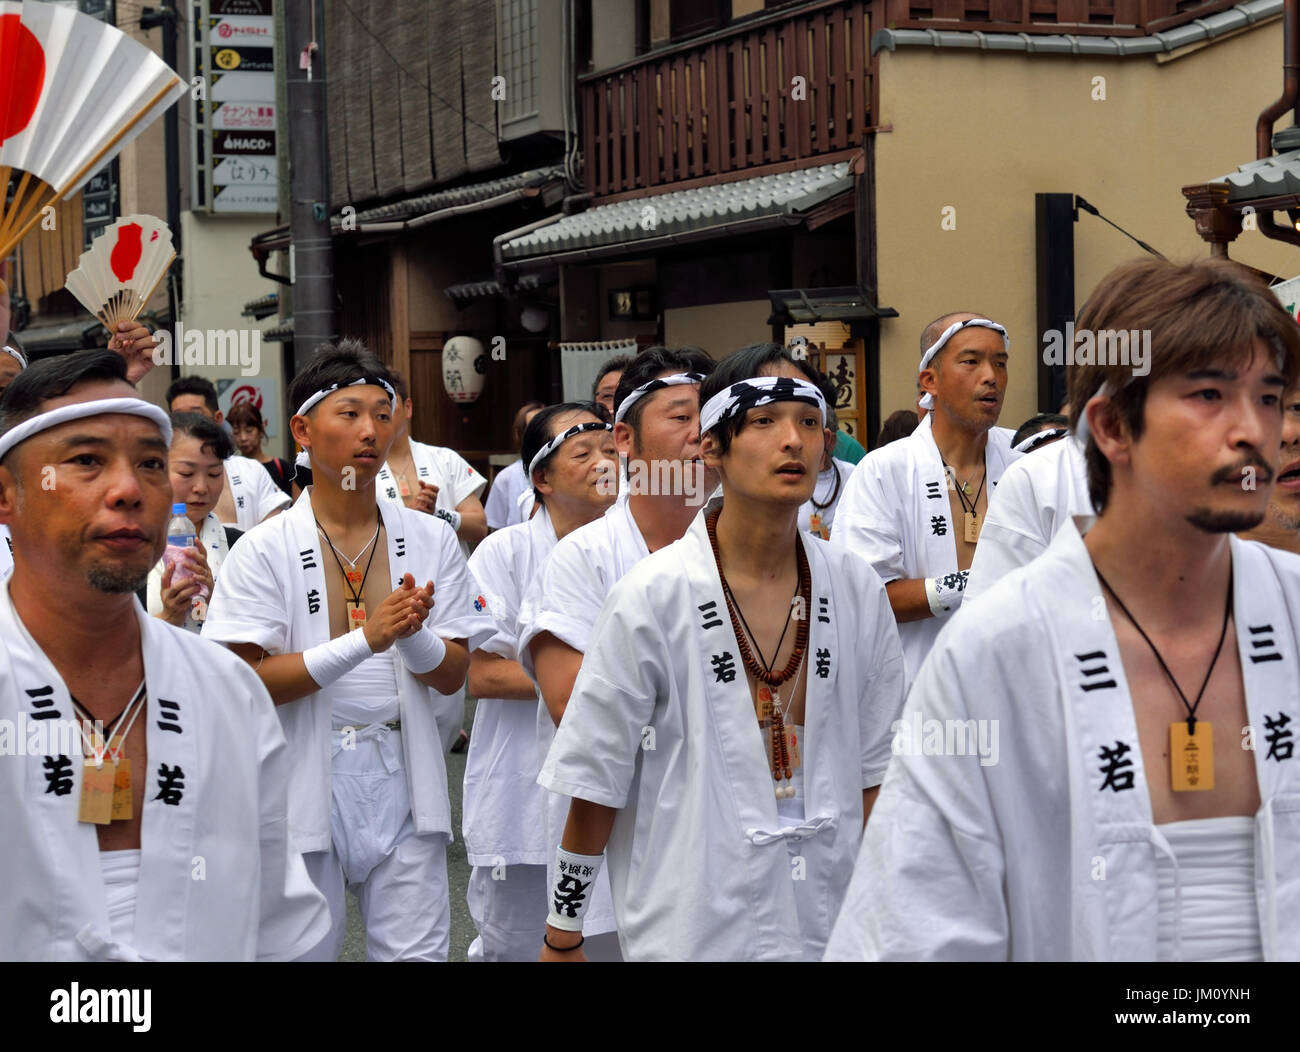 KYOTO, JAPAN - July 24, 2017: A group of men parade down a street in Kyoto, Japan yelling and chanting, as a part of the Gion Festival. Stock Photo